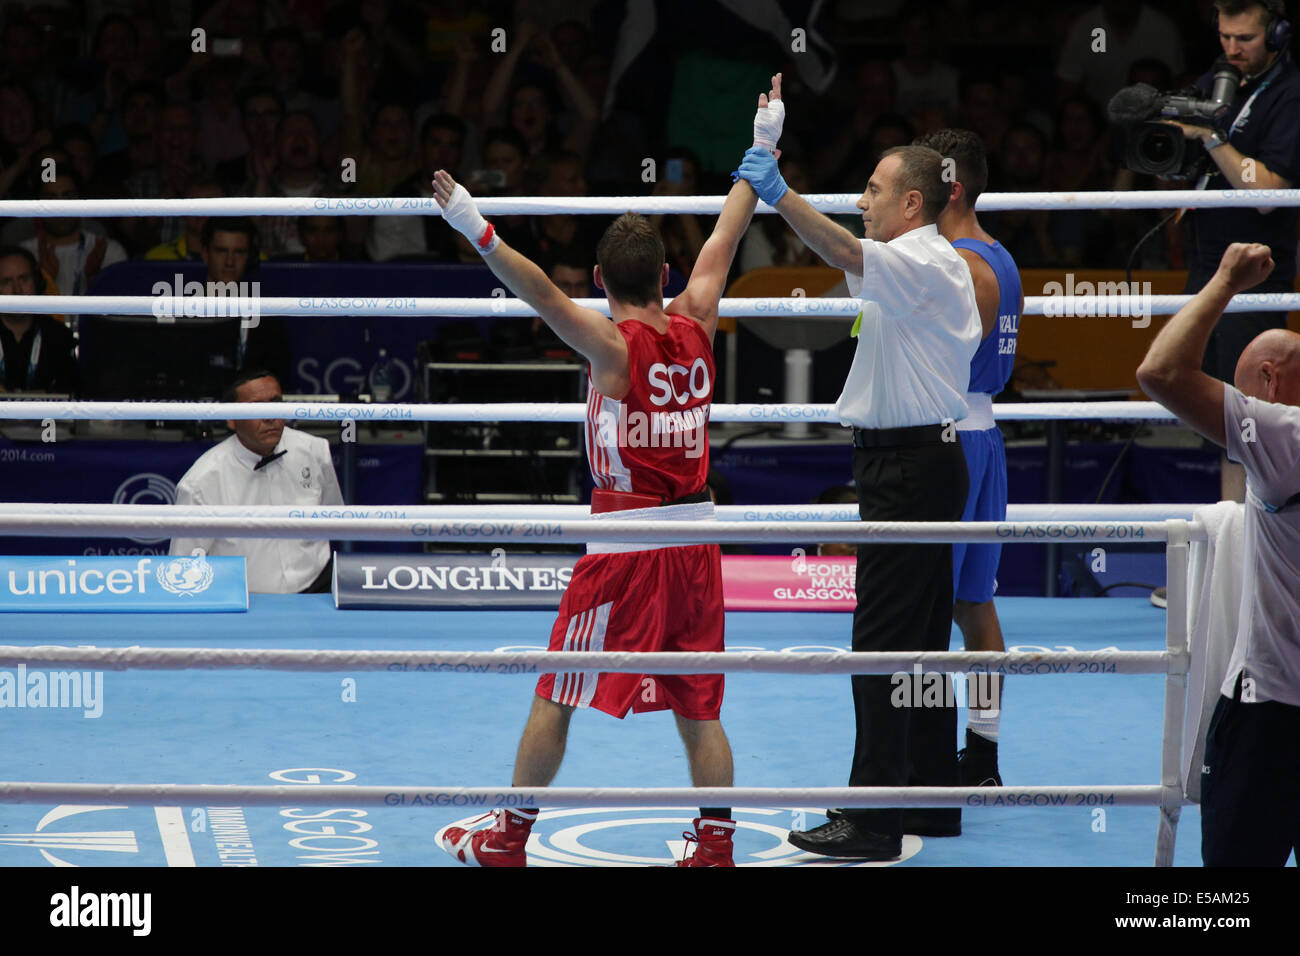 SECC, Glasgow, Scotland, UK, Friday, 25th July, 2014. Flyweight 52kg Preliminary Boxing Match. Reece McFadden of Scotland in red declared the winner in his bout against Andrew Selby of Wales in blue at the Glasgow 2014 Commonwealth Games Stock Photo